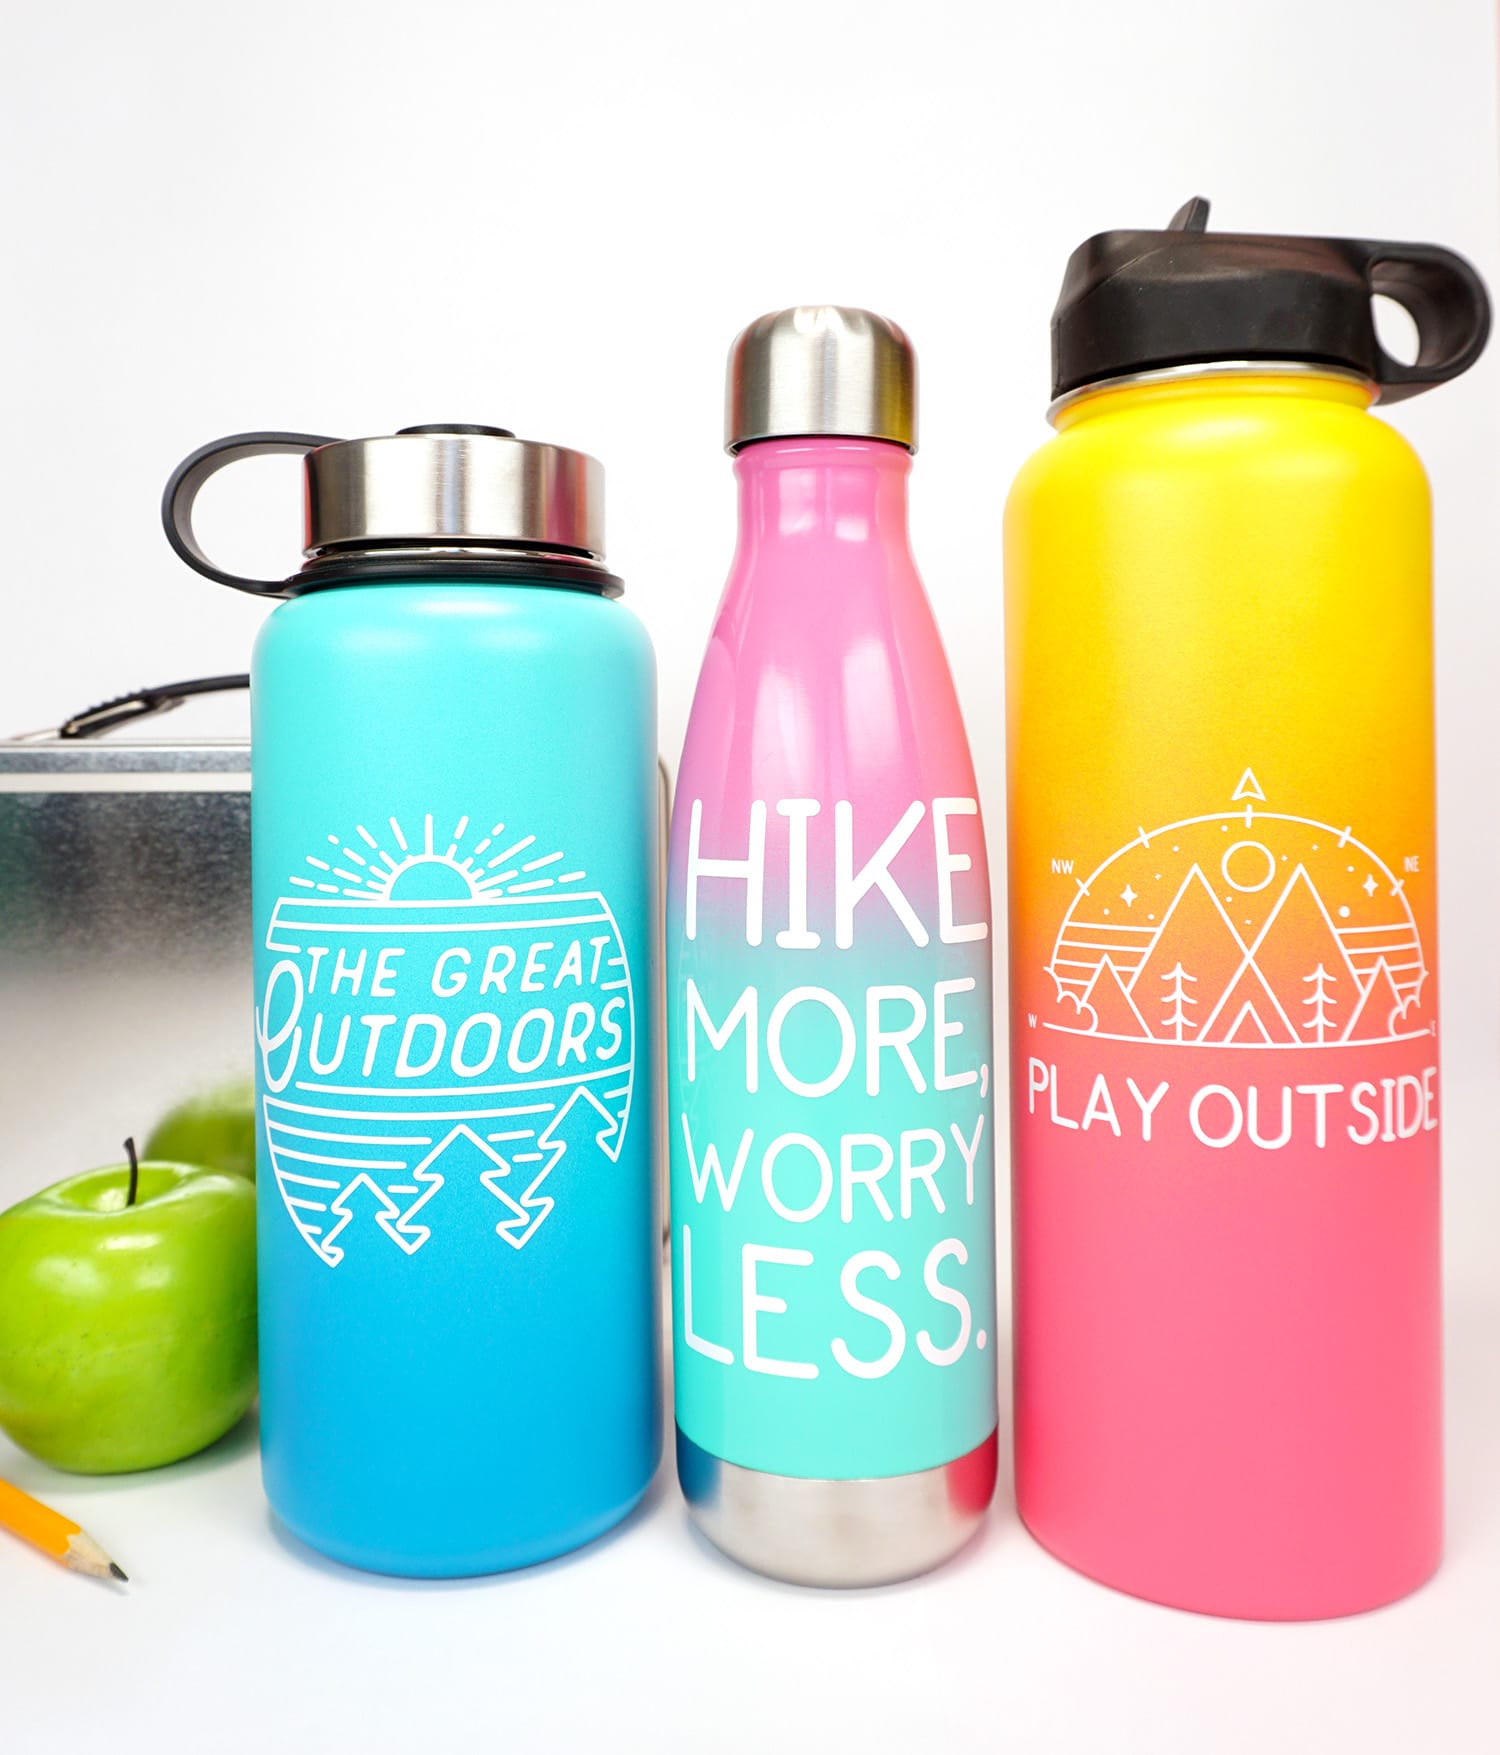 Eco Friendly Insulated Custom Water Bottle For Sale Online